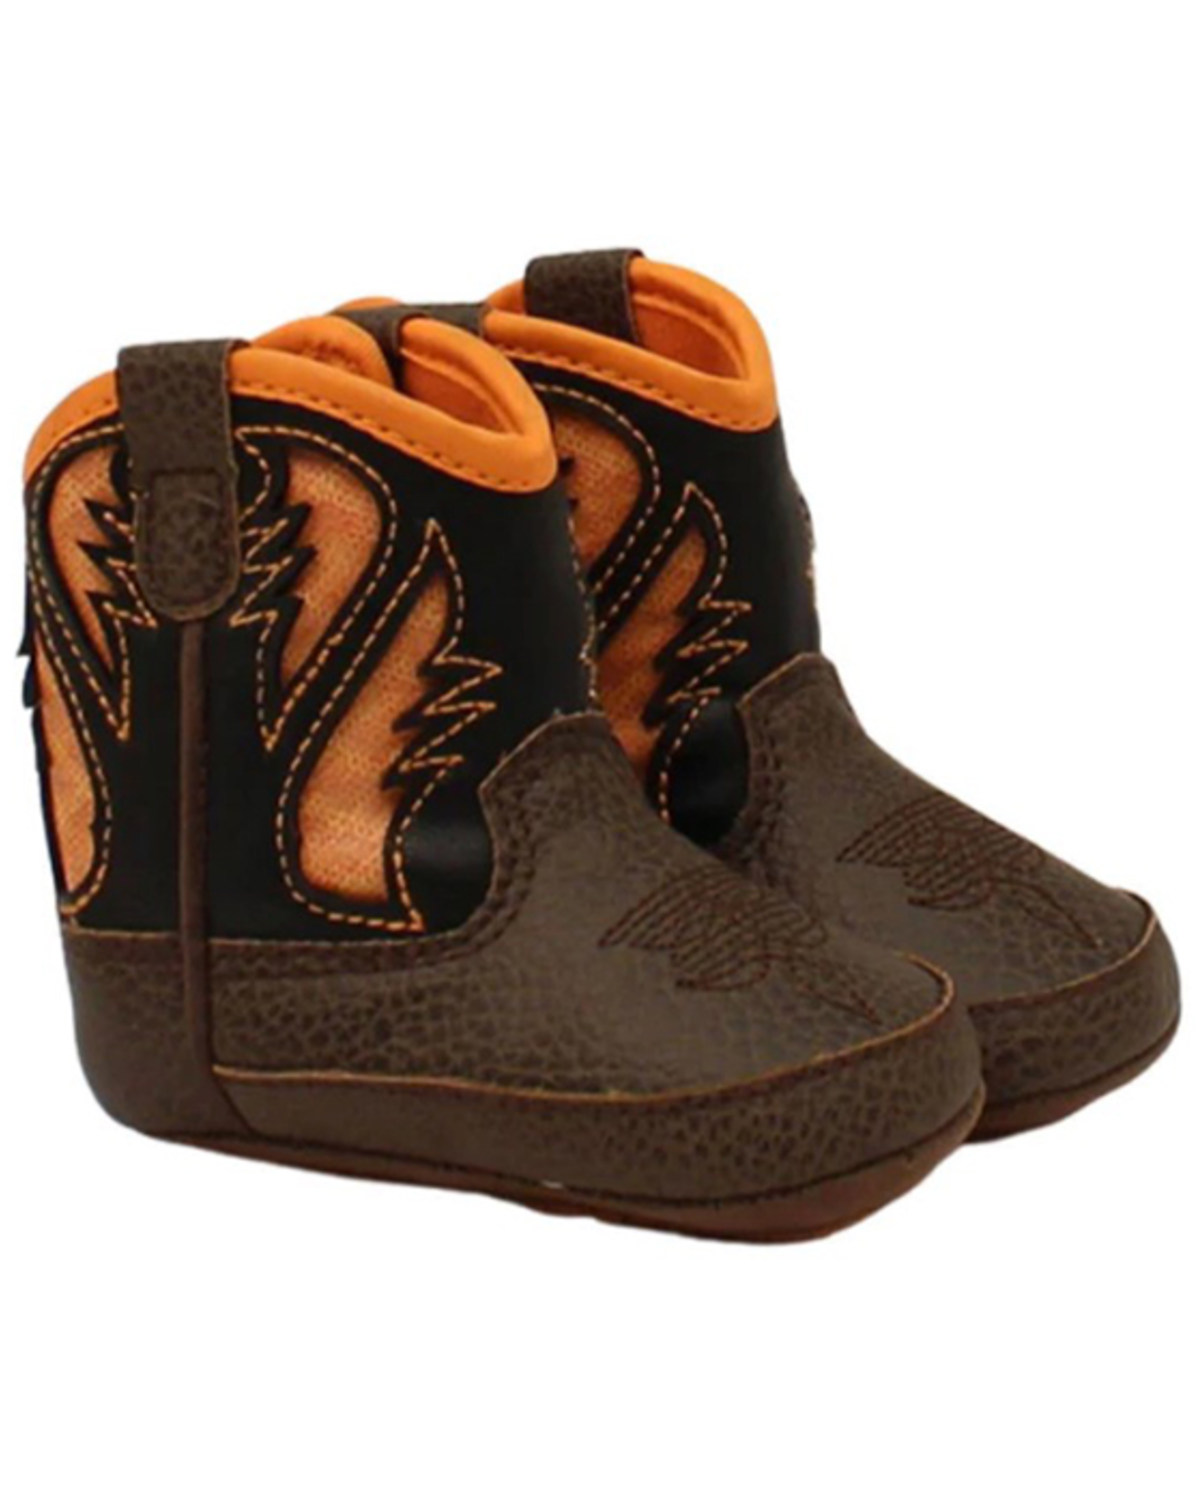 Ariat Infant-Boys' Lil Stomper Intrepid Western Boots